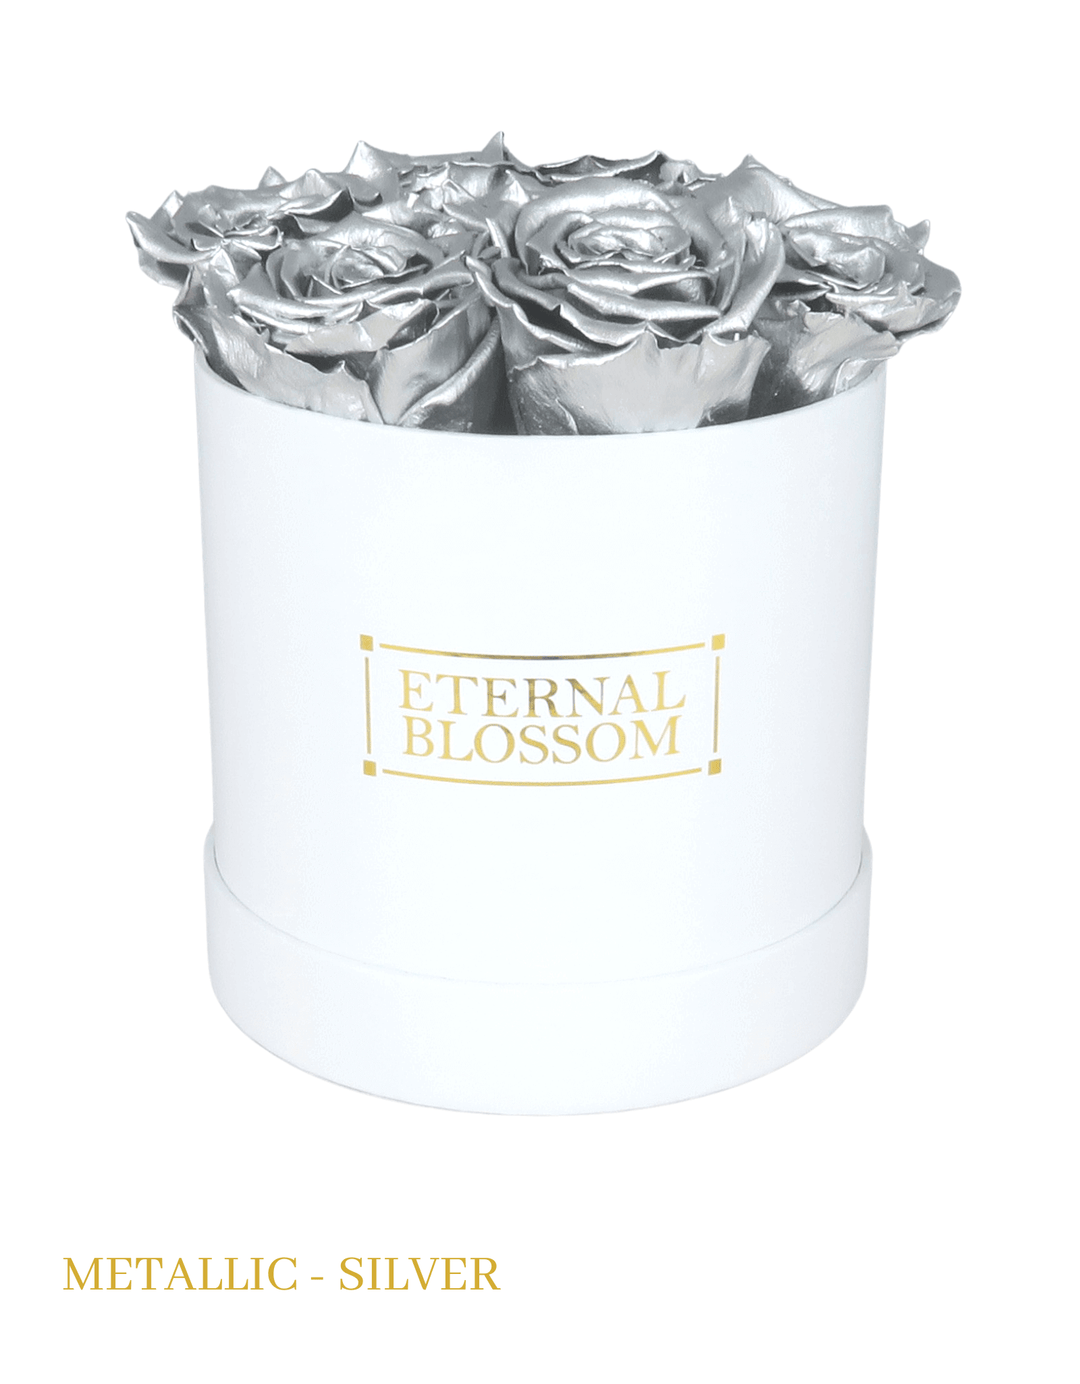 Medium Round Blossom Box - White Box - All Colours of Year Lasting Infinity Roses